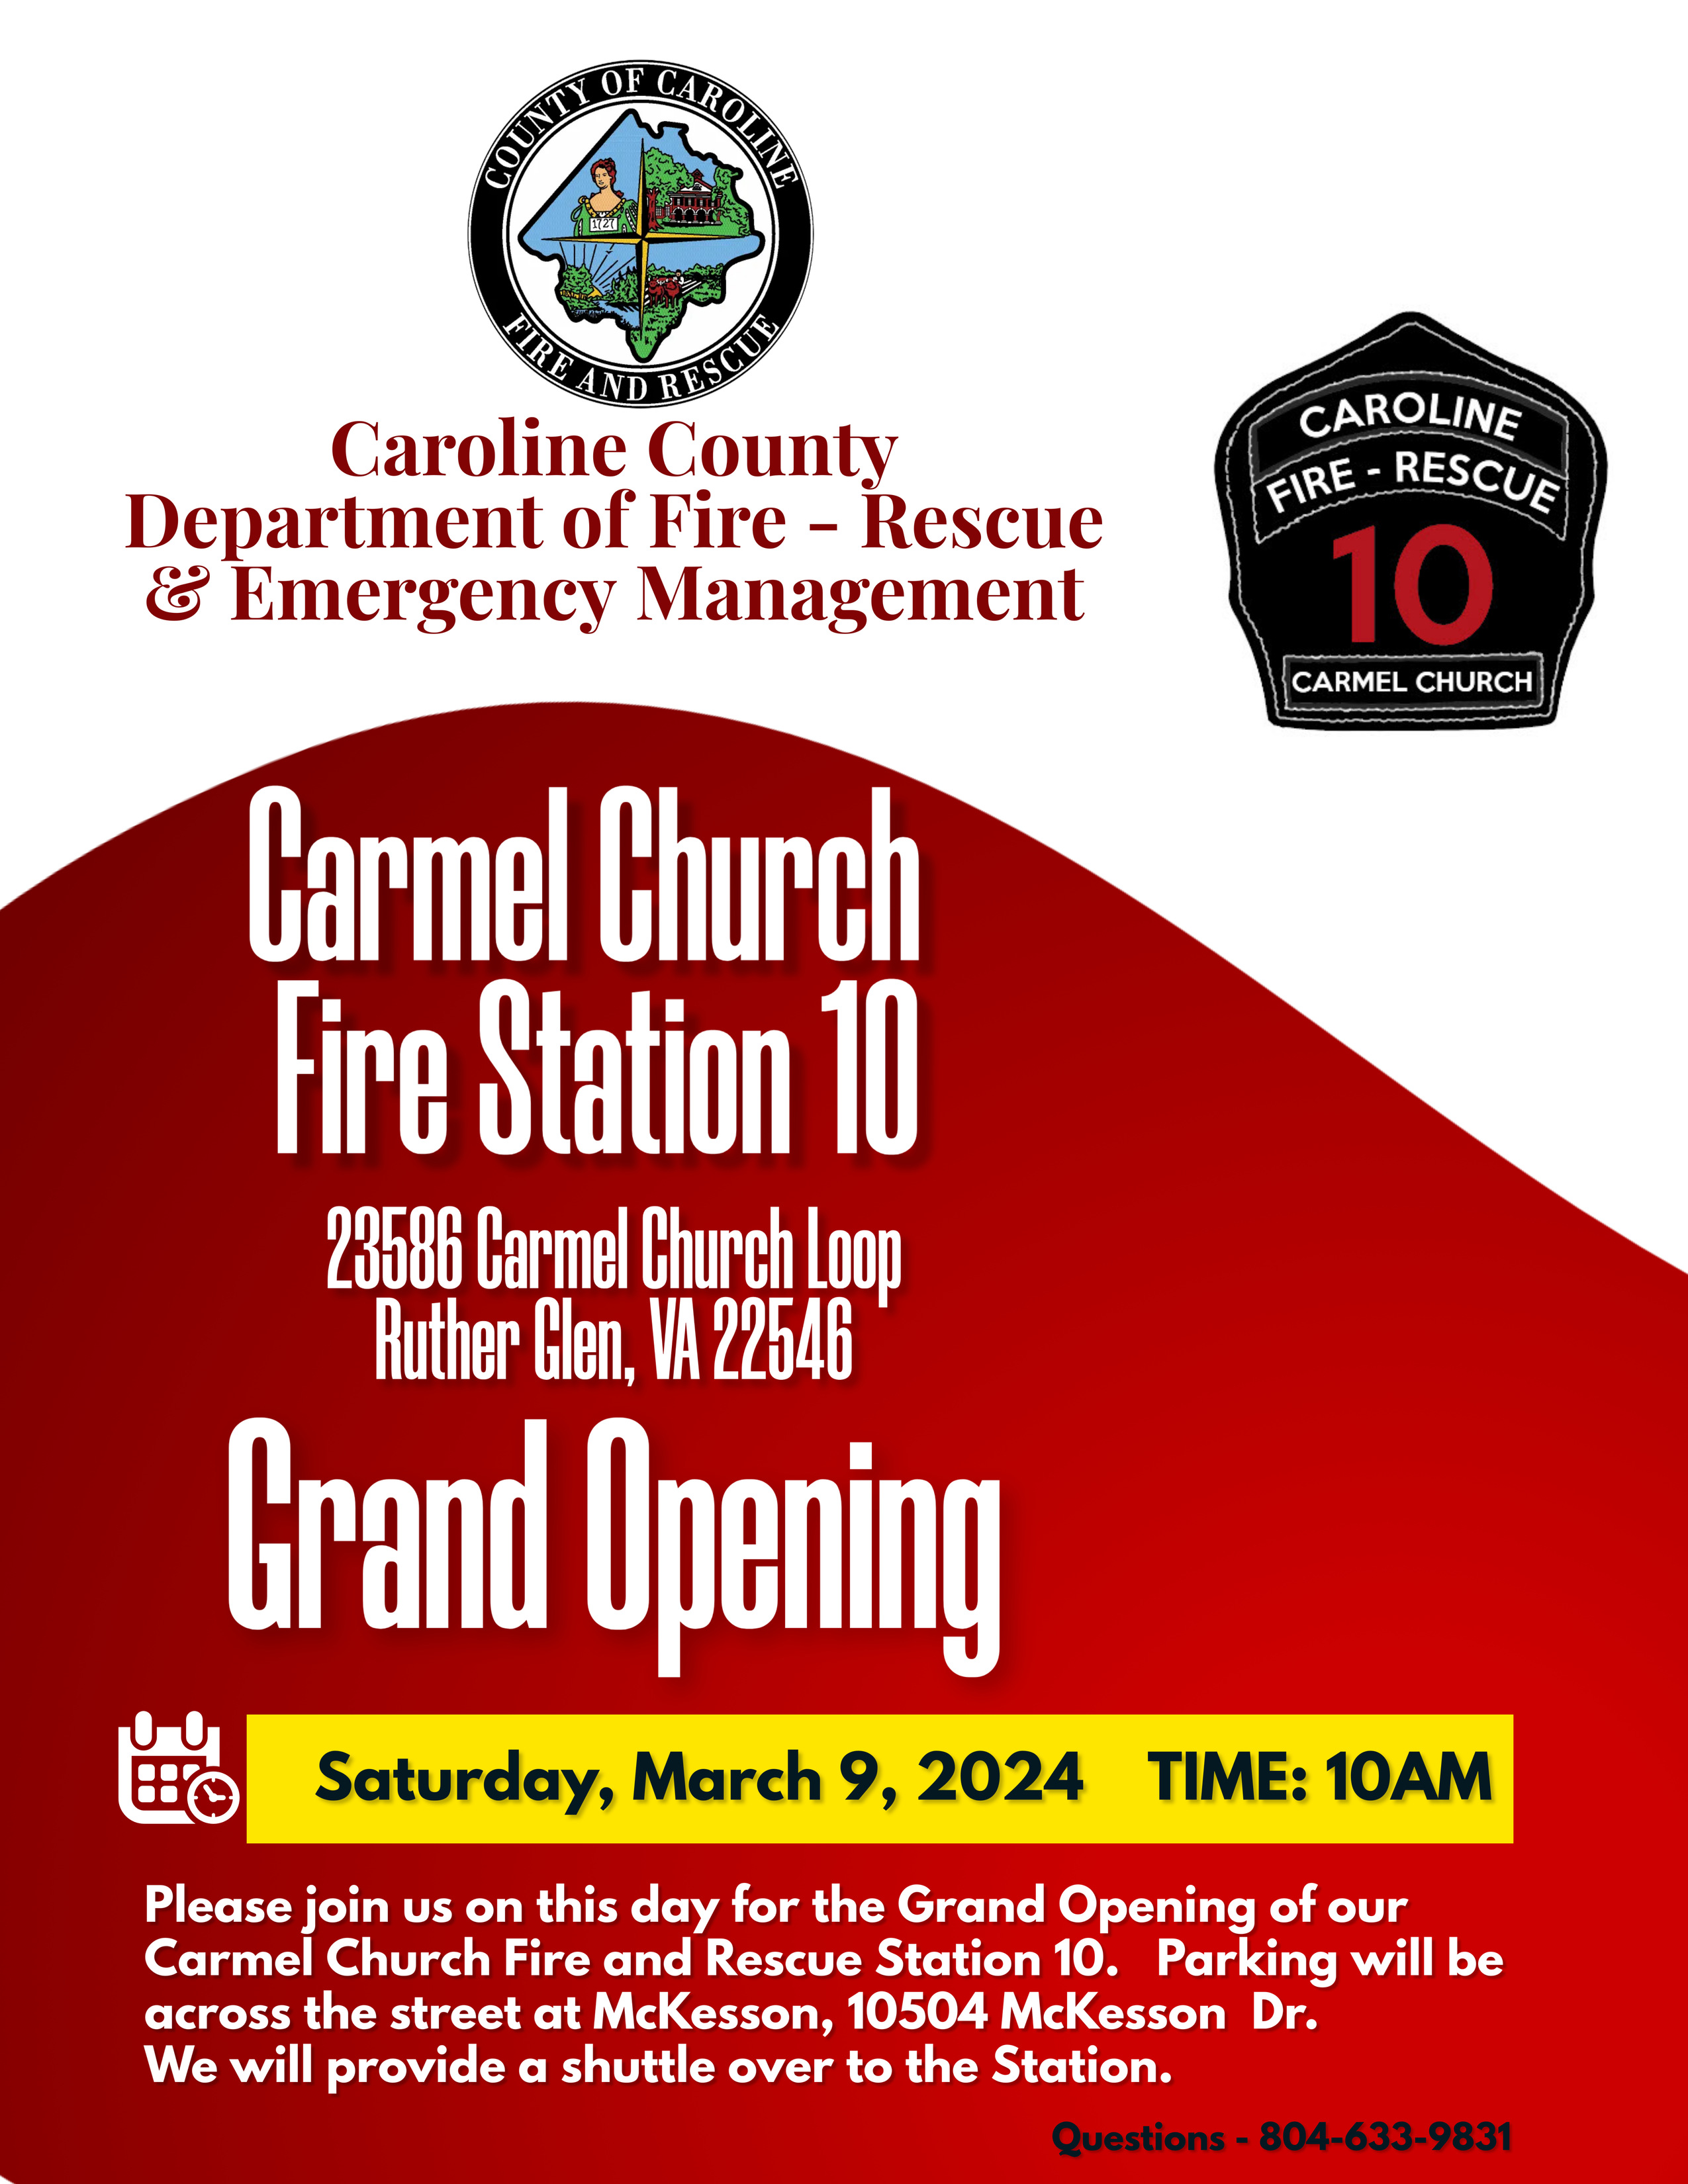 Station 10 Grand Opening - March 9, 2024